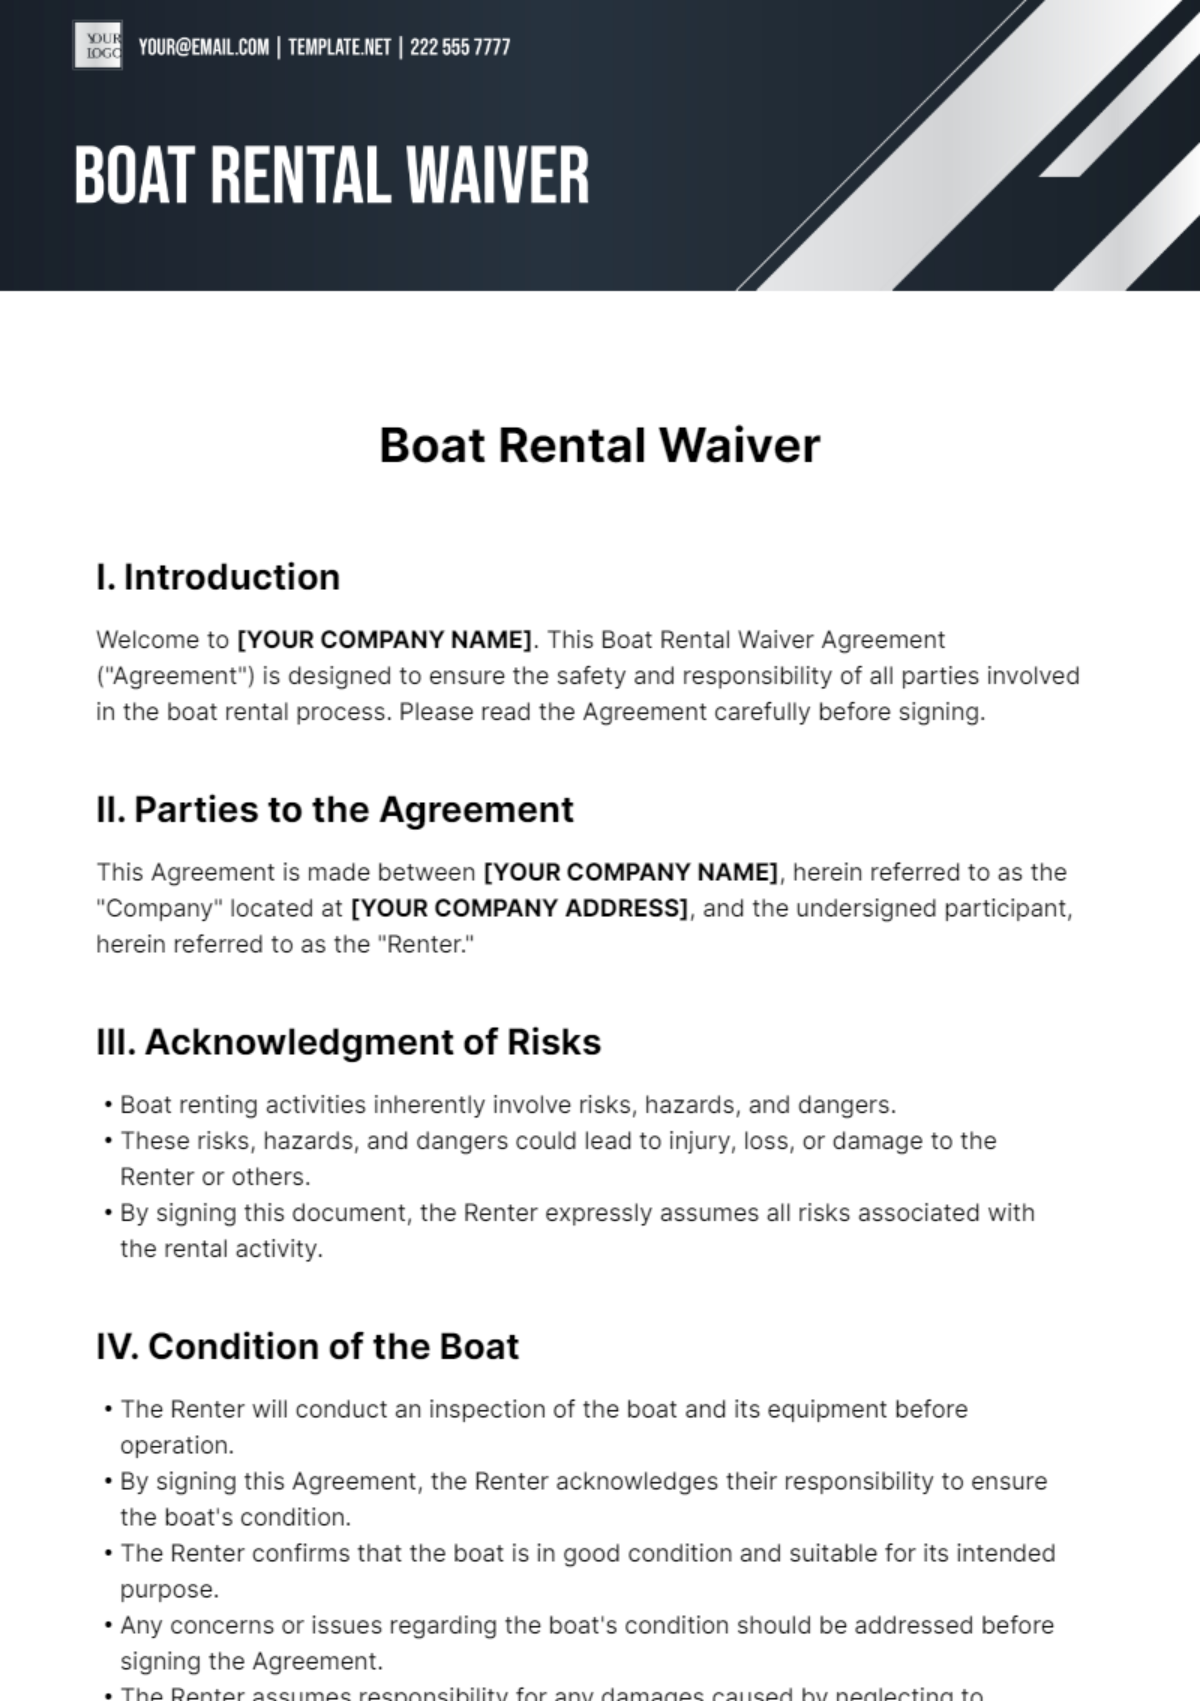 Free Boat Rental Waiver Template